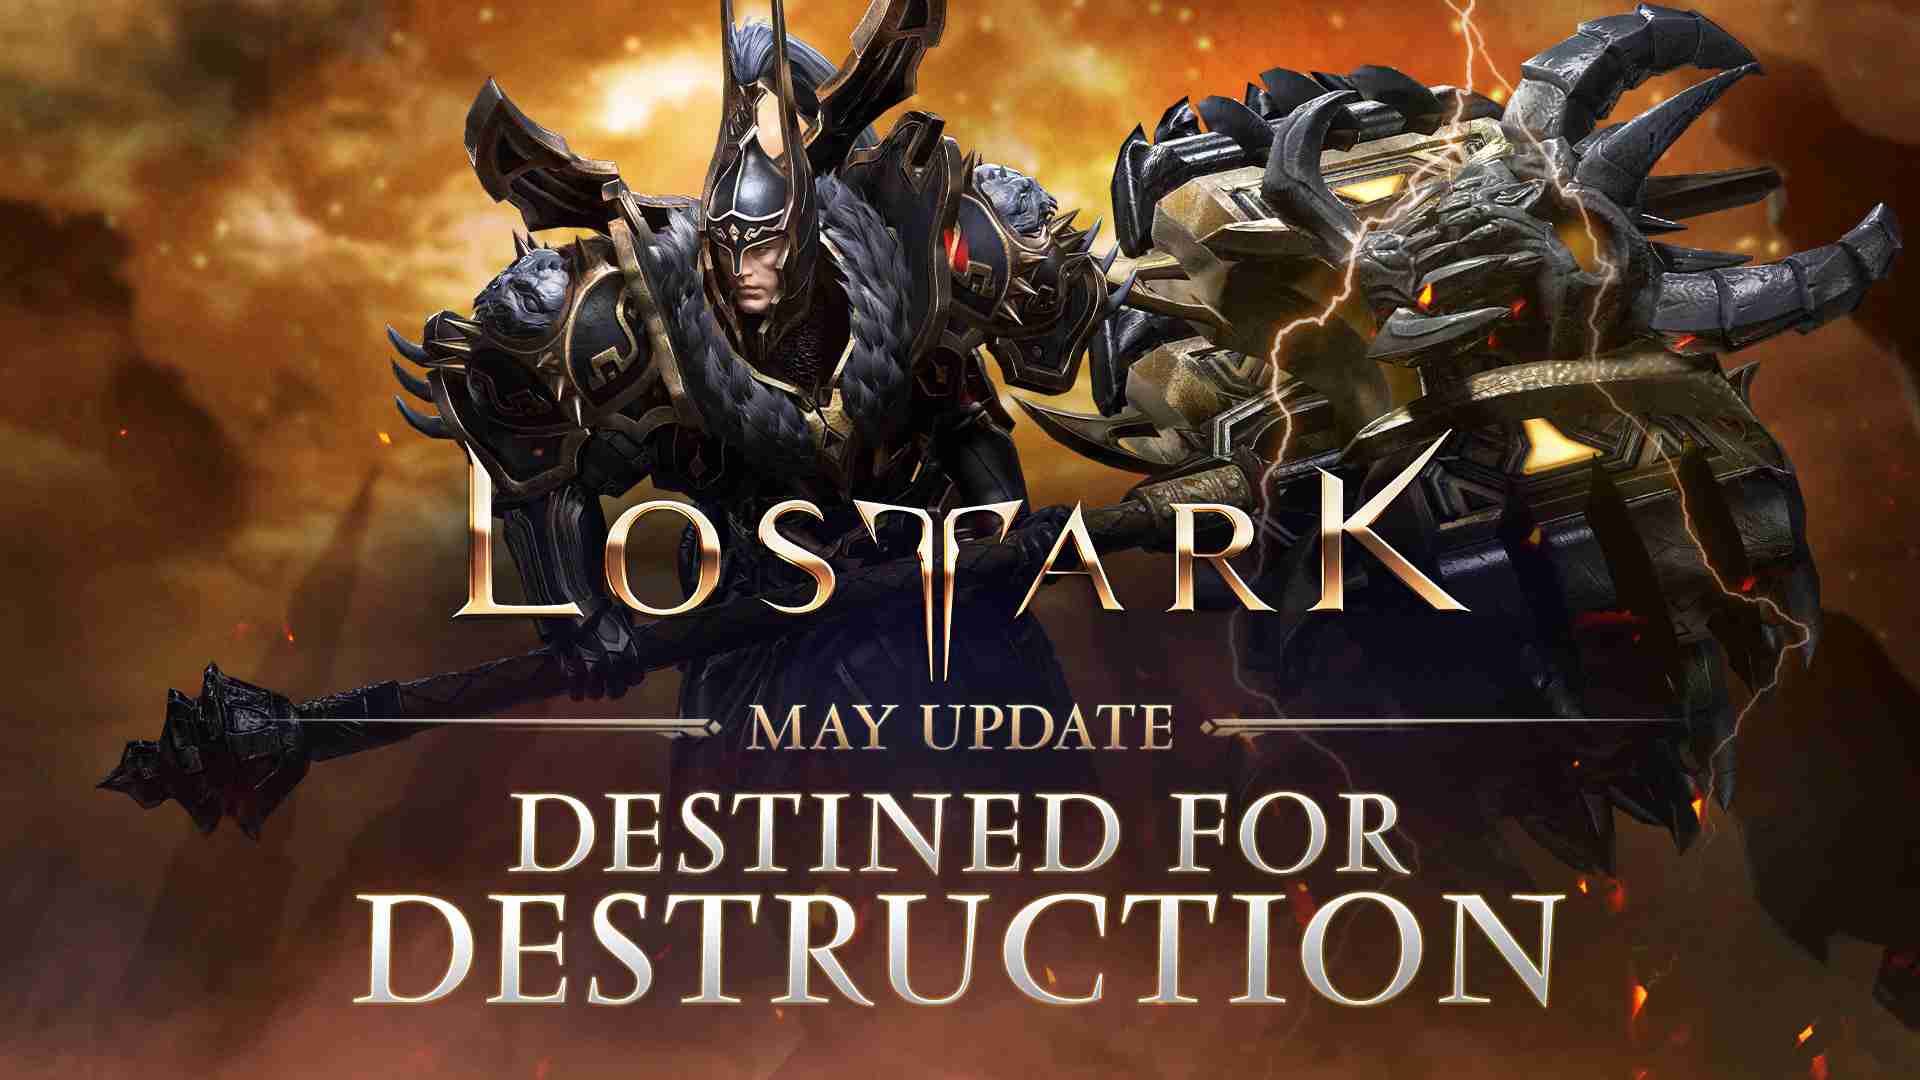 Lost Ark May 19 update - The Destined For Destruction patch notes